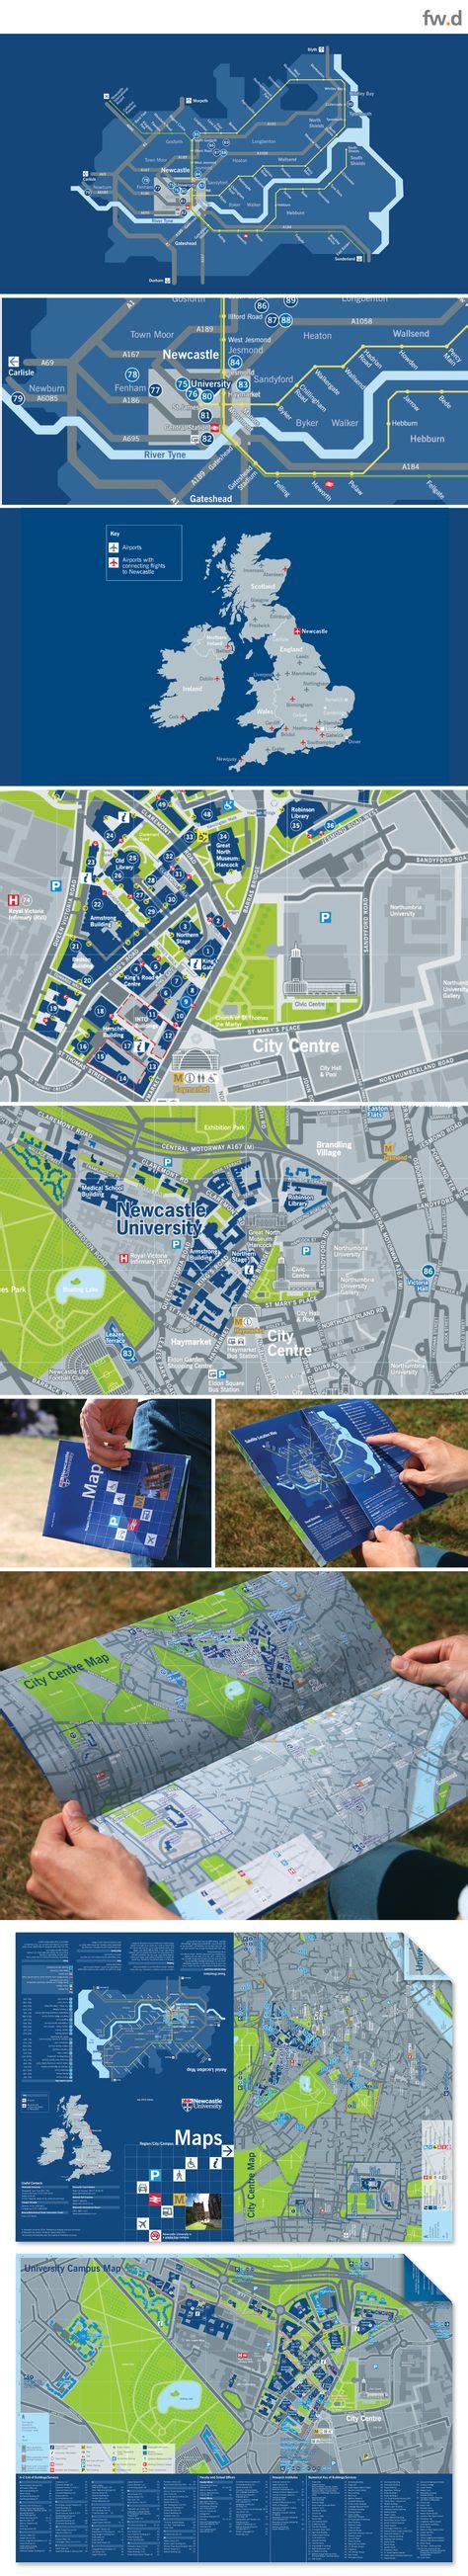 Range Of Campus Wayfinding Maps For Newcastle University By Fwdesign